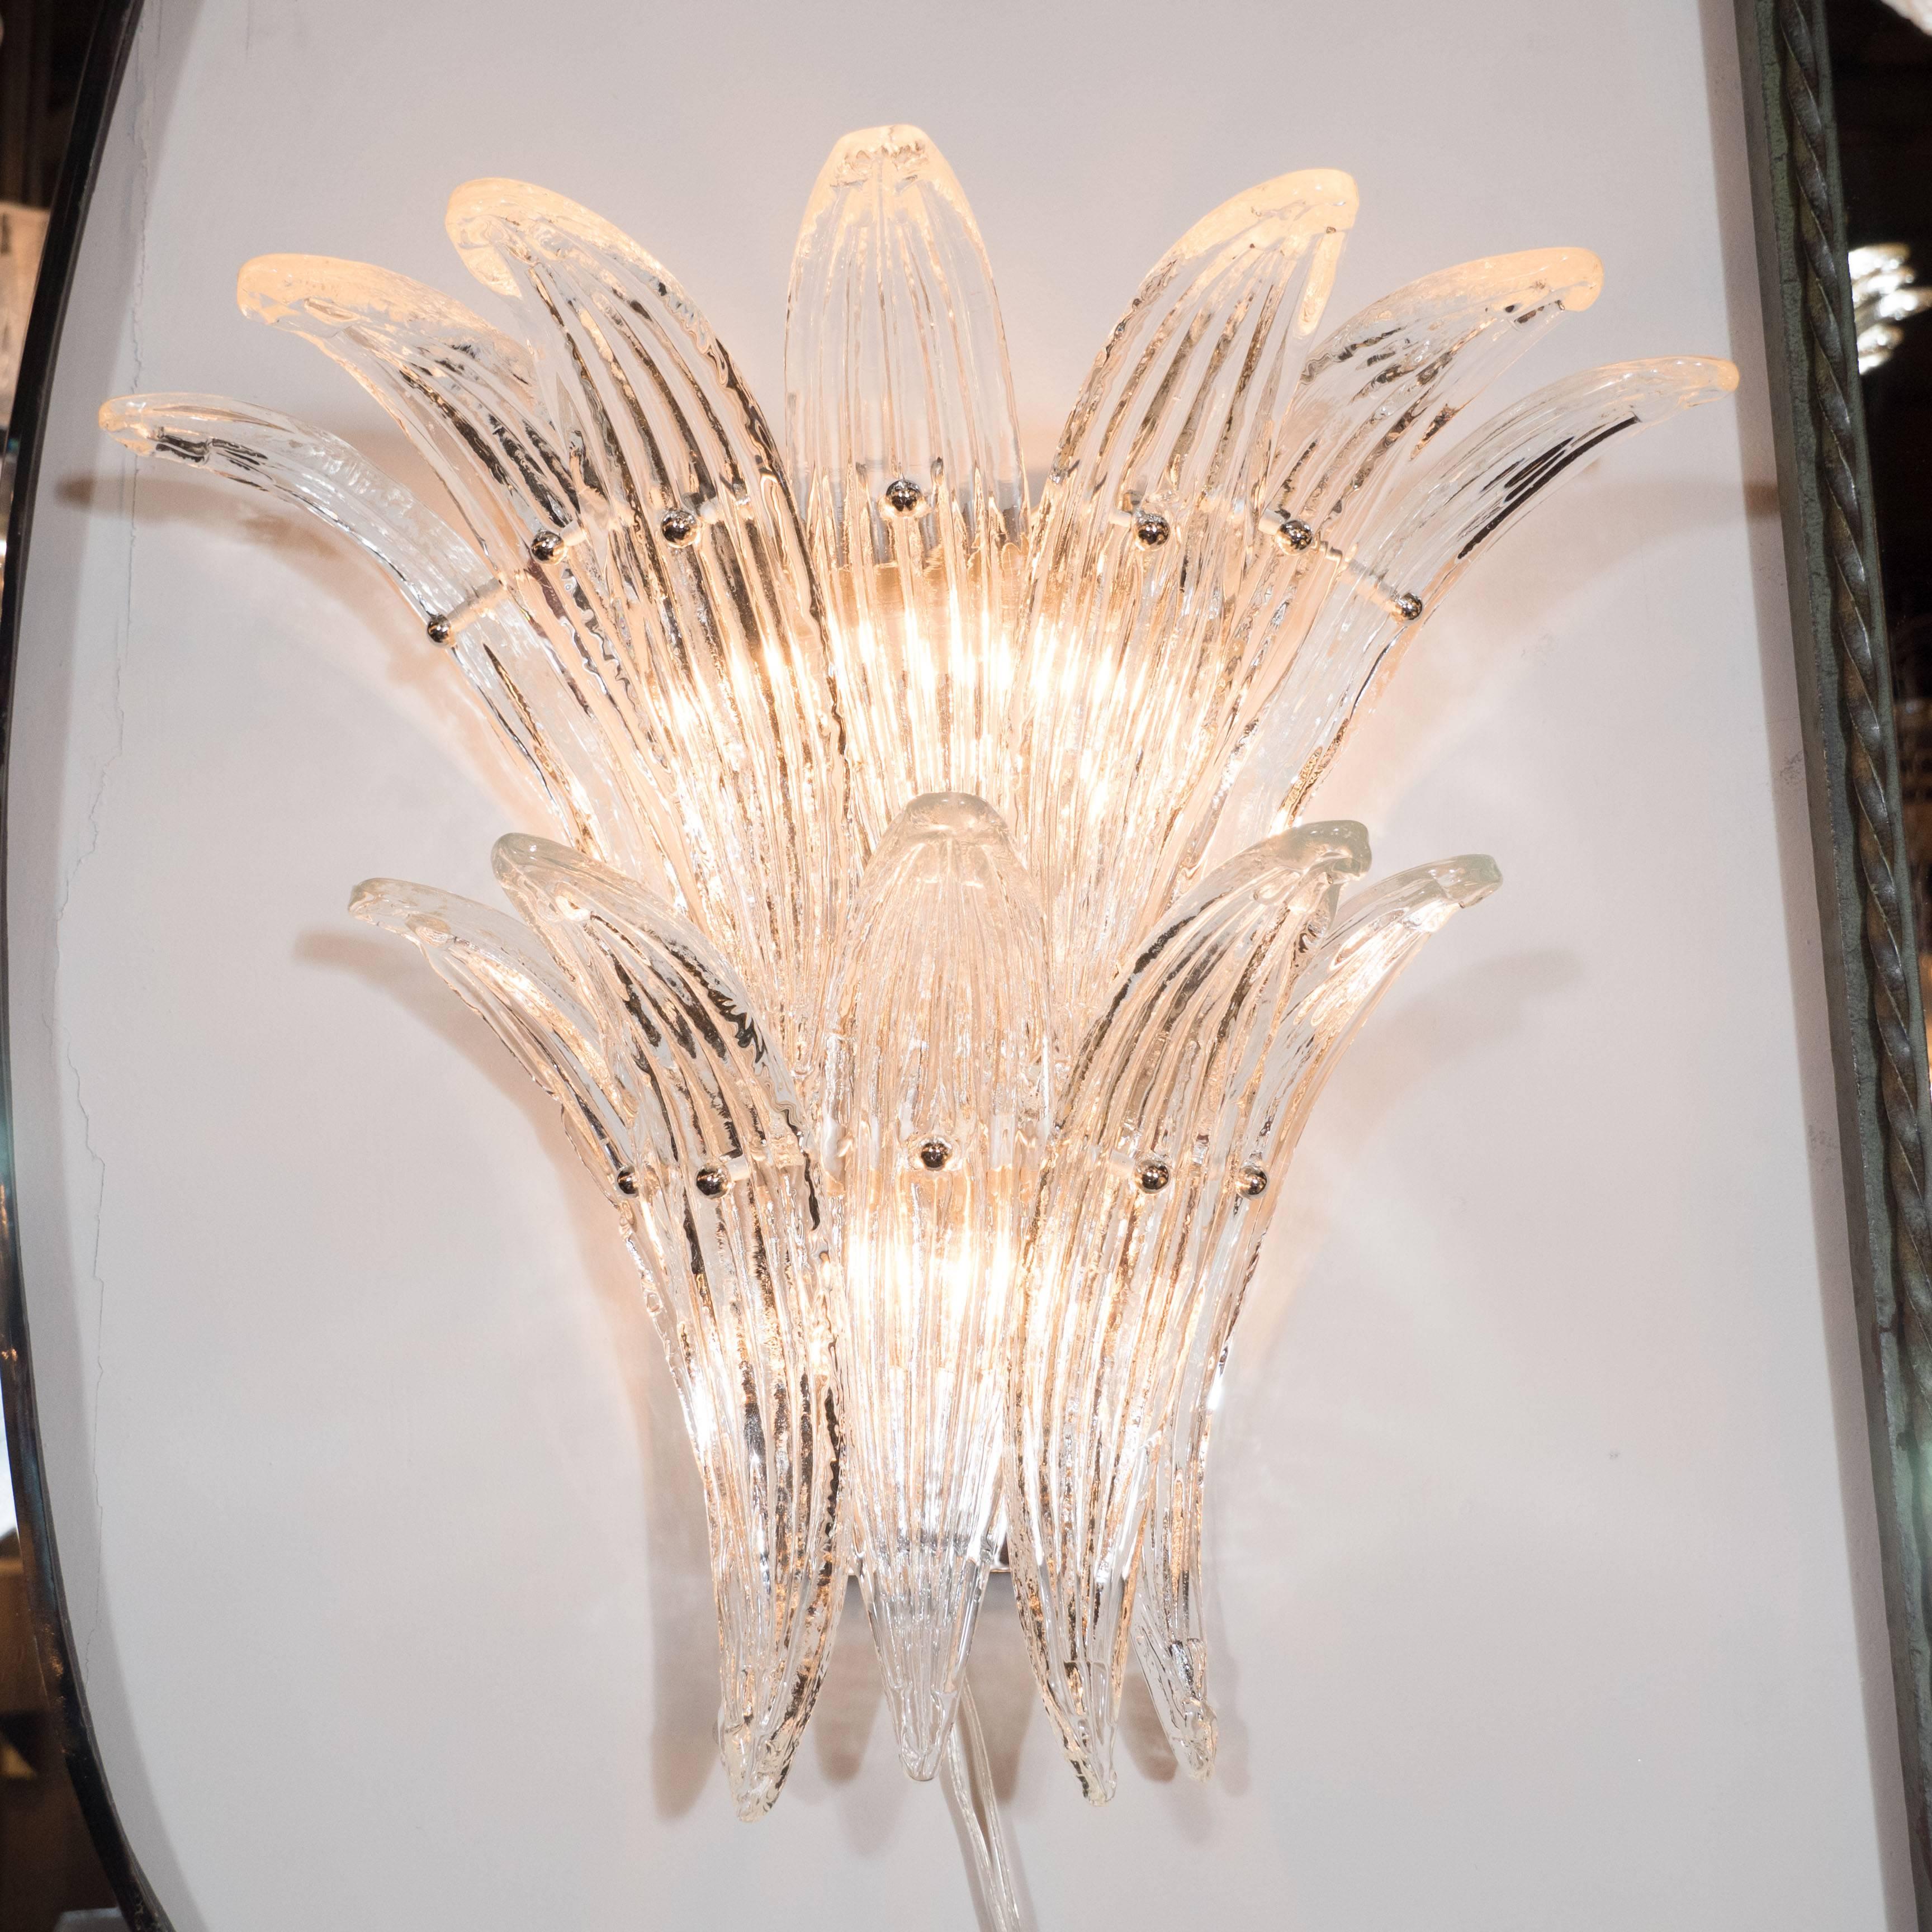 Pair of Mid-Century two-tier palm sconces in clear Murano glass. Each sconce consists of a chrome frame with 12 individually attached handblown Murano glass palm fronds. Chrome ball supports screw into rods holding up each from at its centre. Each